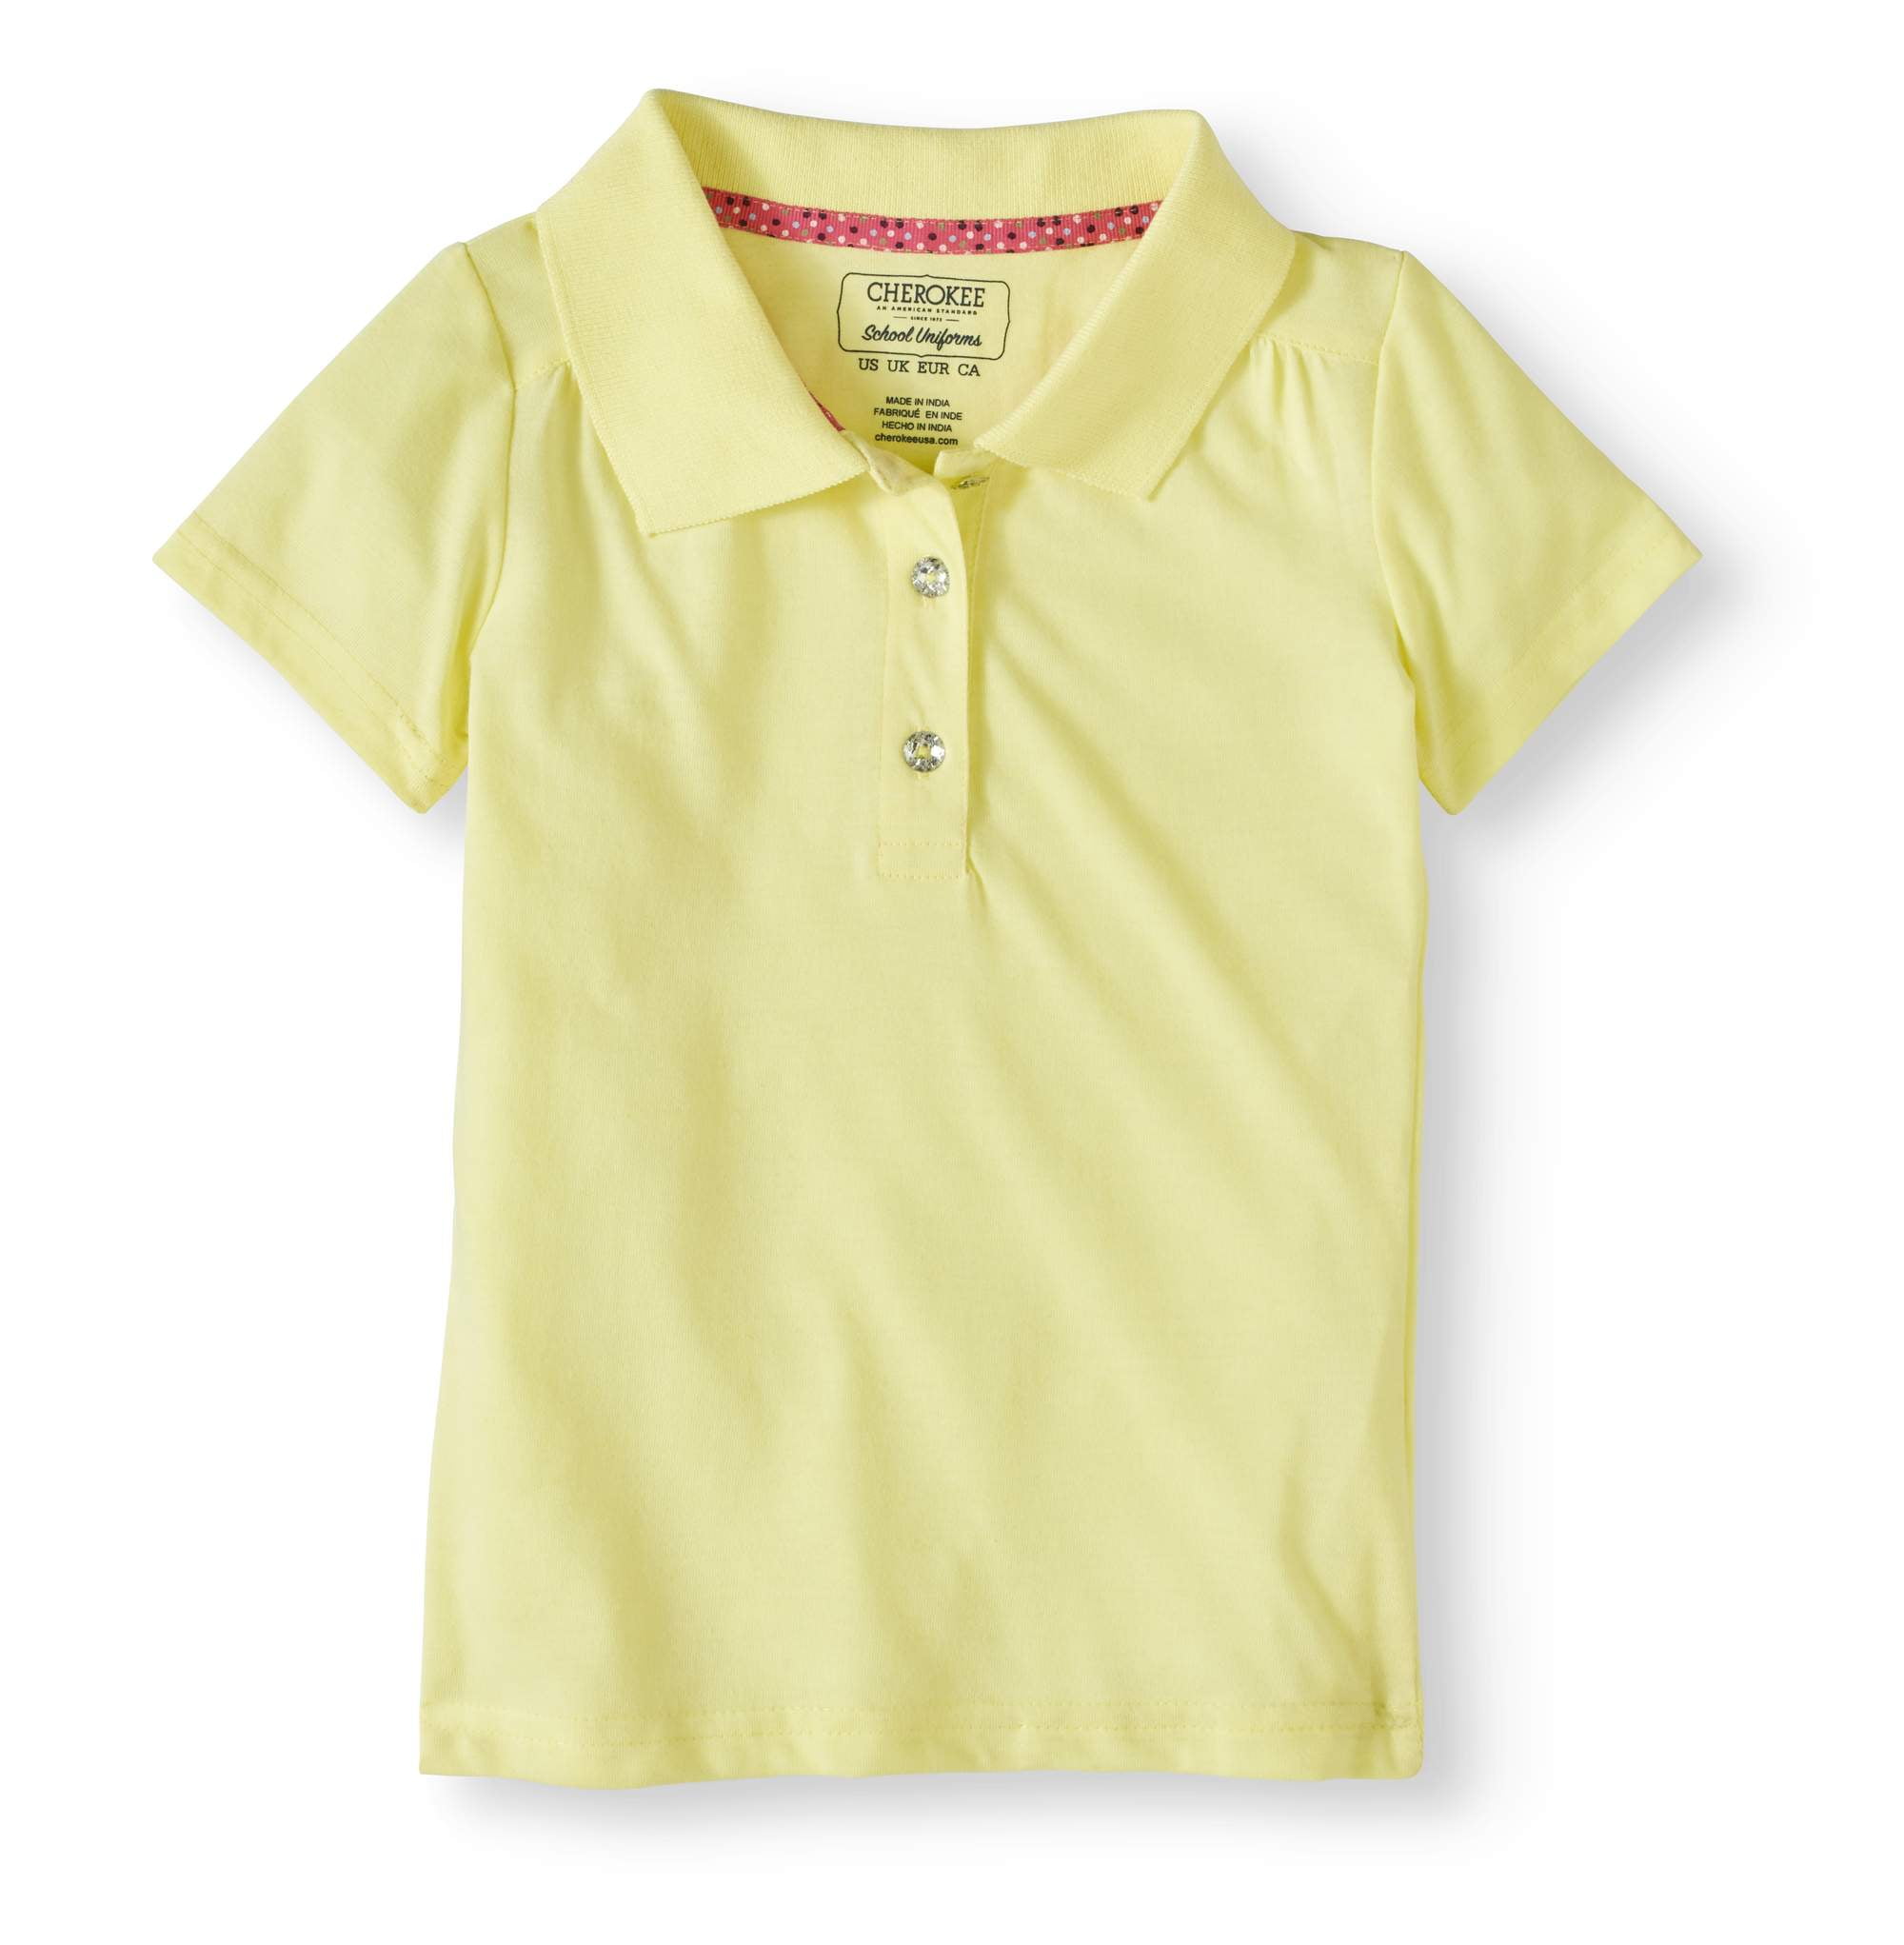 CHEROKEE Girls Uniform Short Sleeve Polo with Faux Twofer